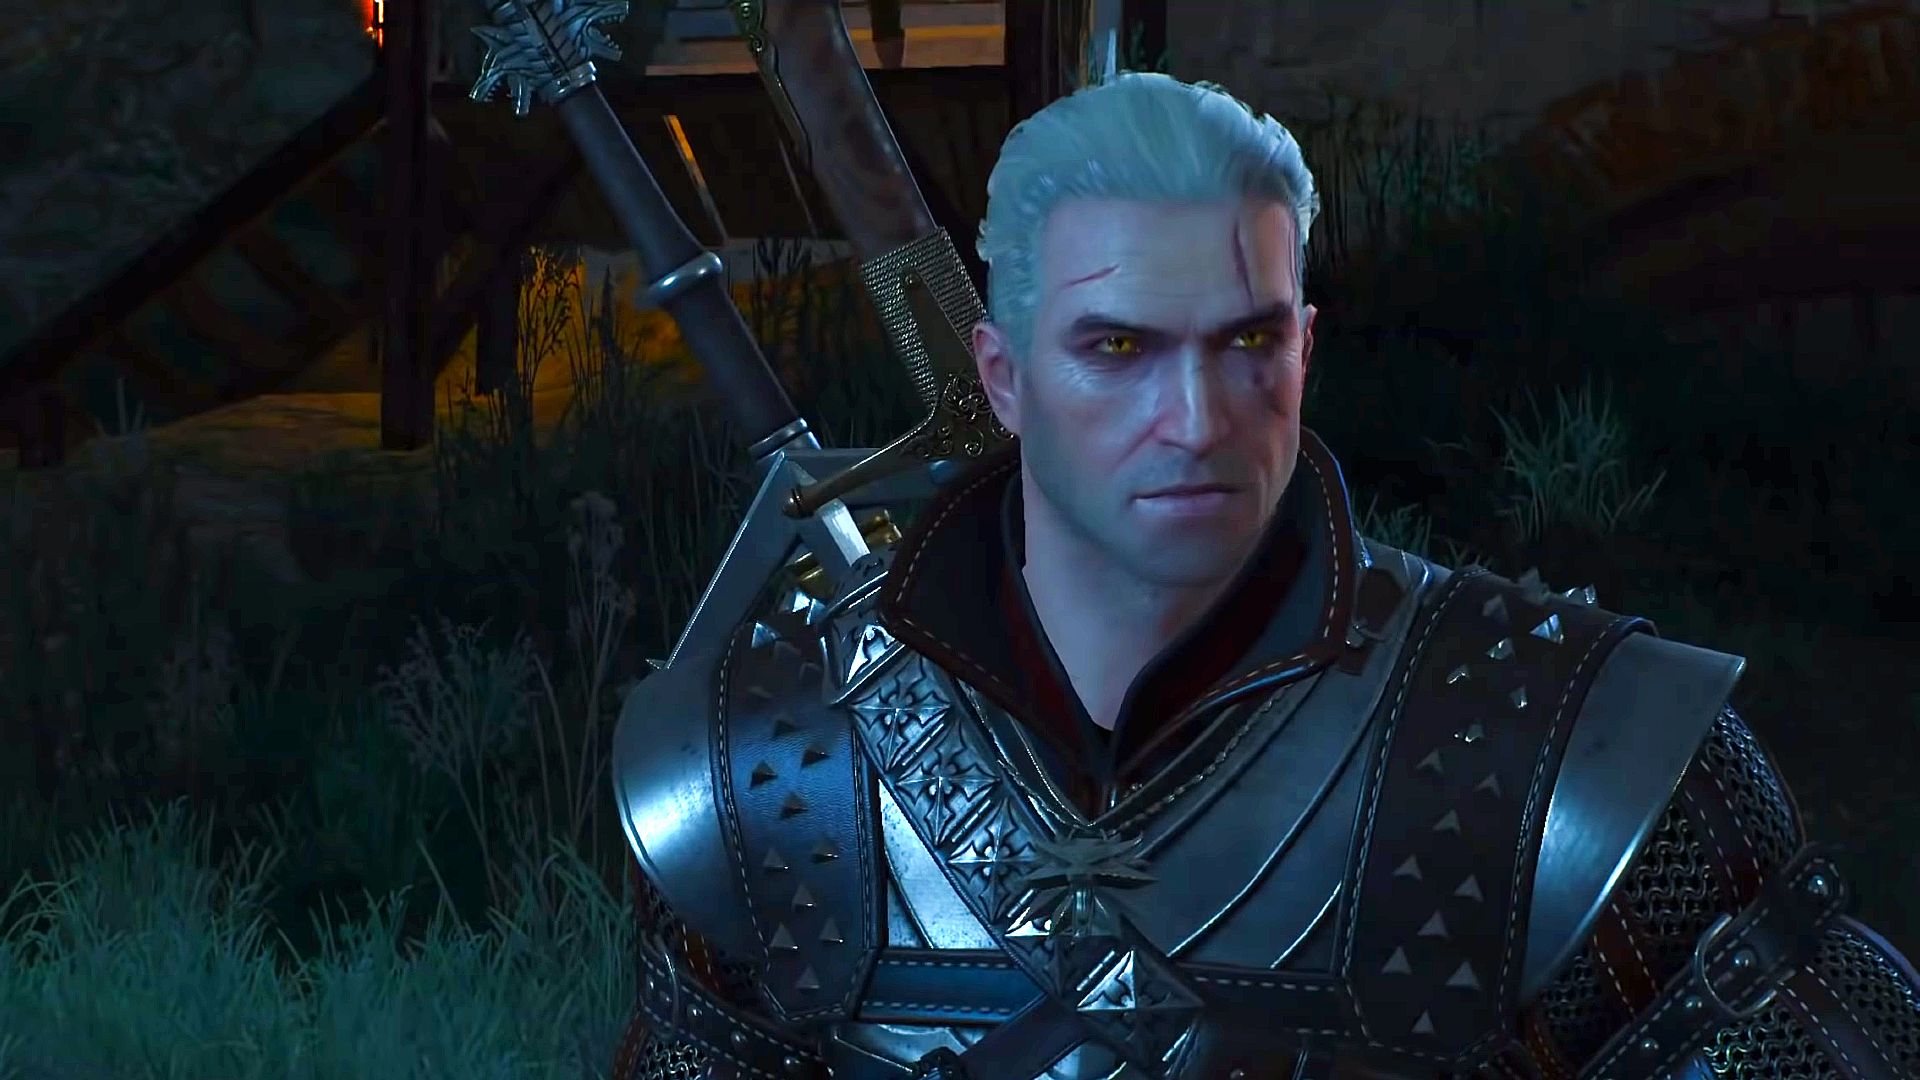 Check out this new modded adventure for The Witcher